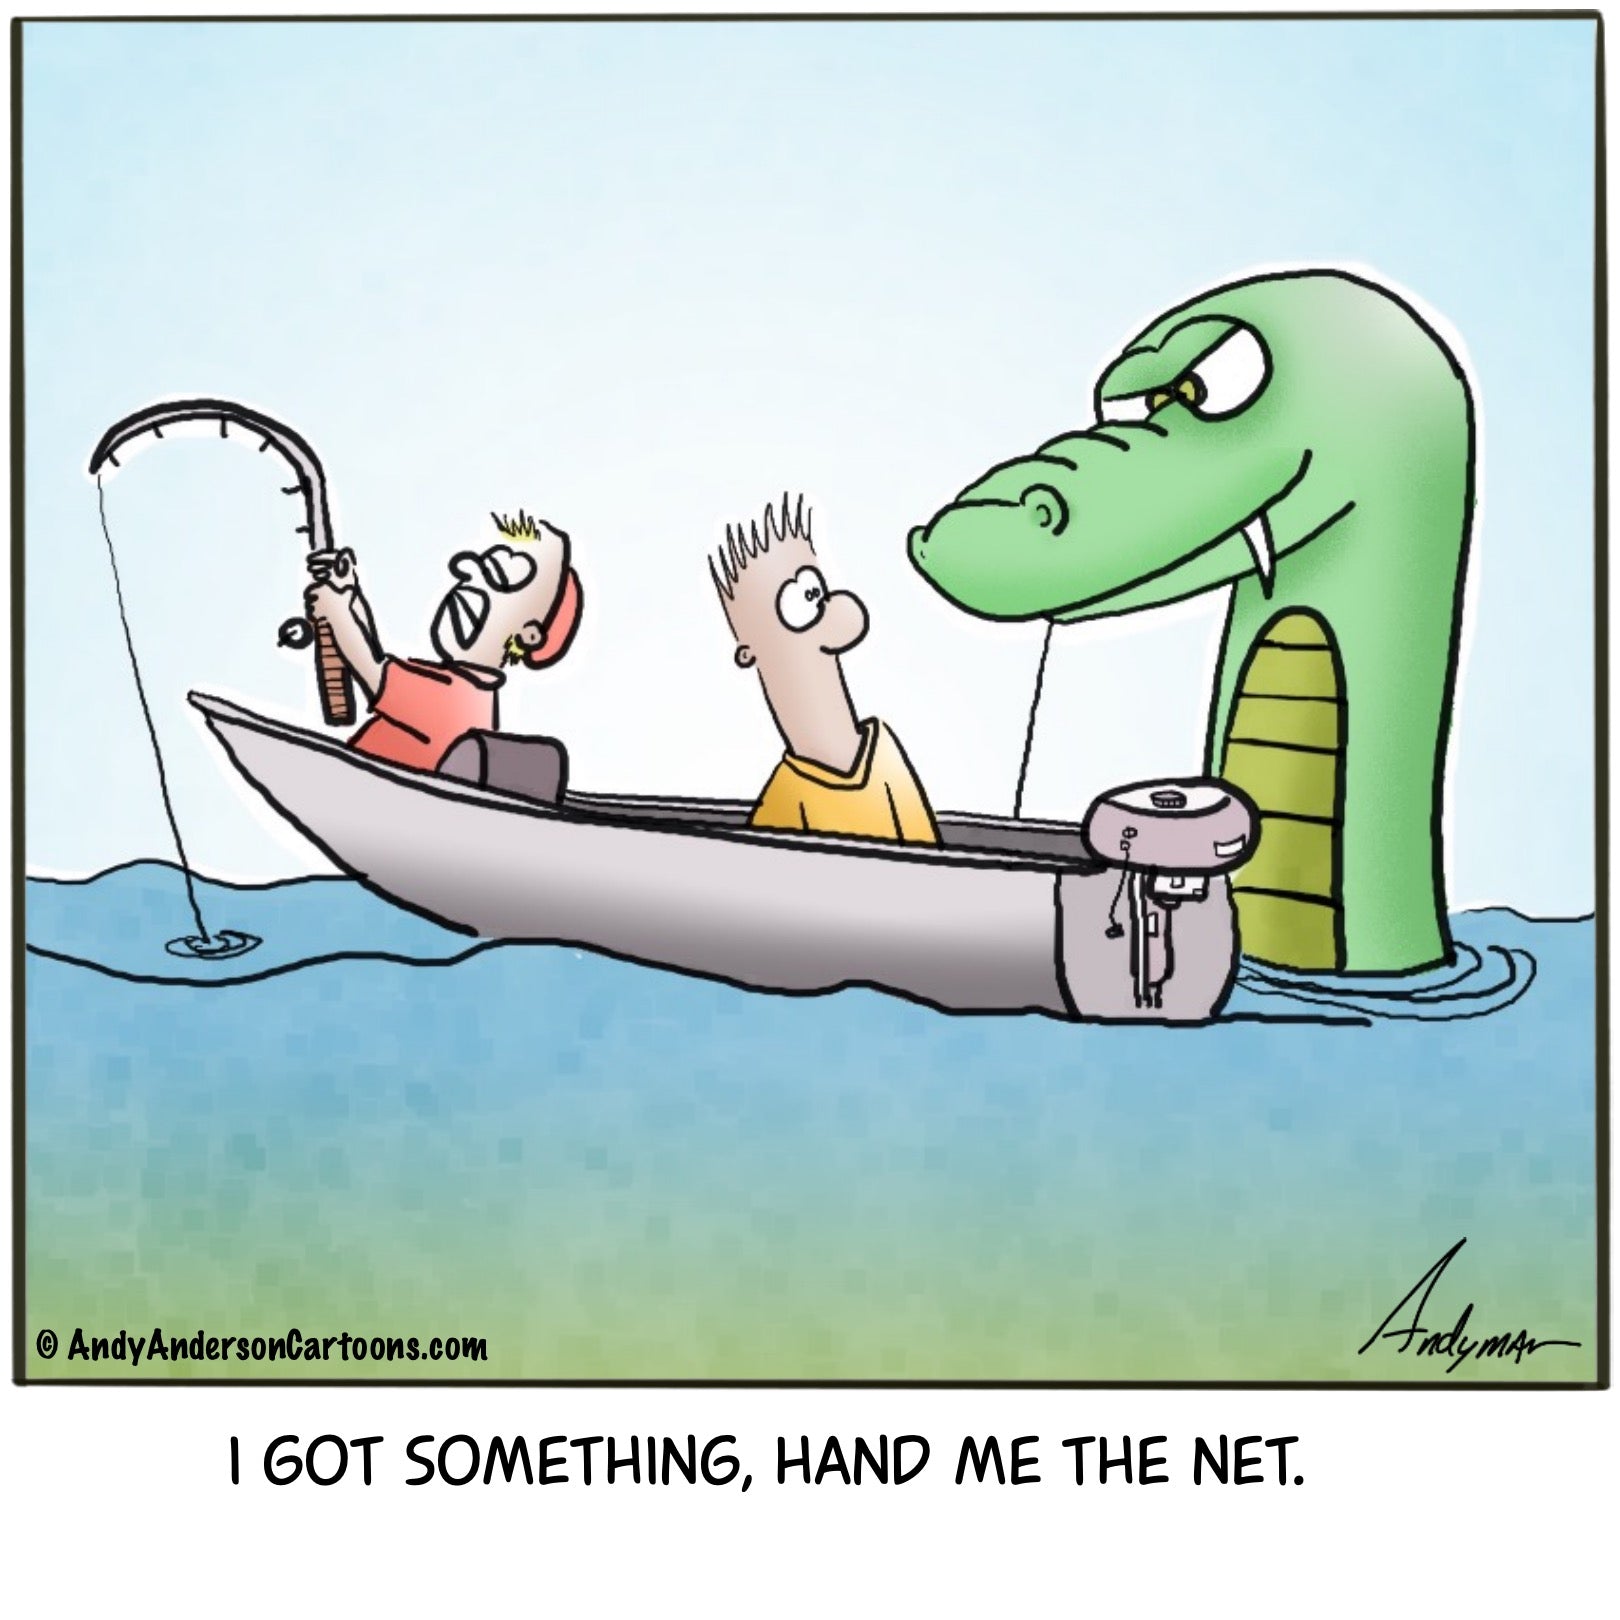 Fishing for dragons cartoon by Andy Anderson